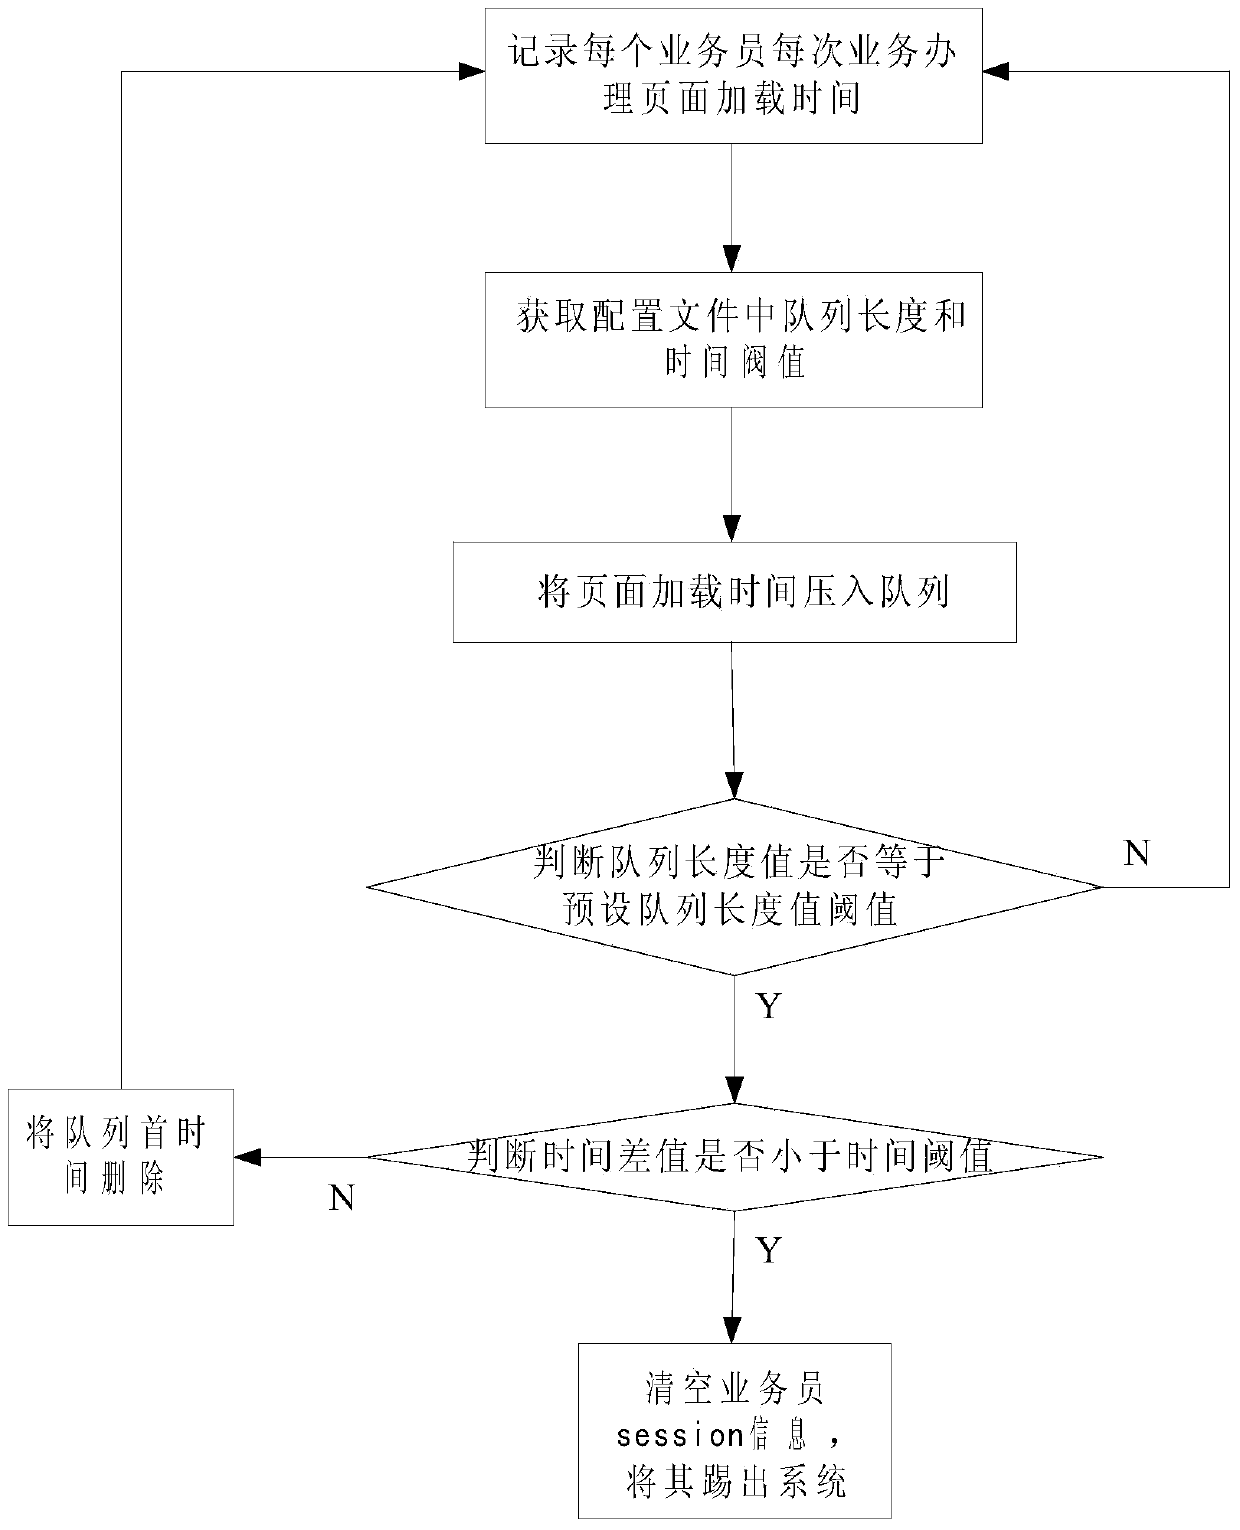 Abnormal system service call detection method and system